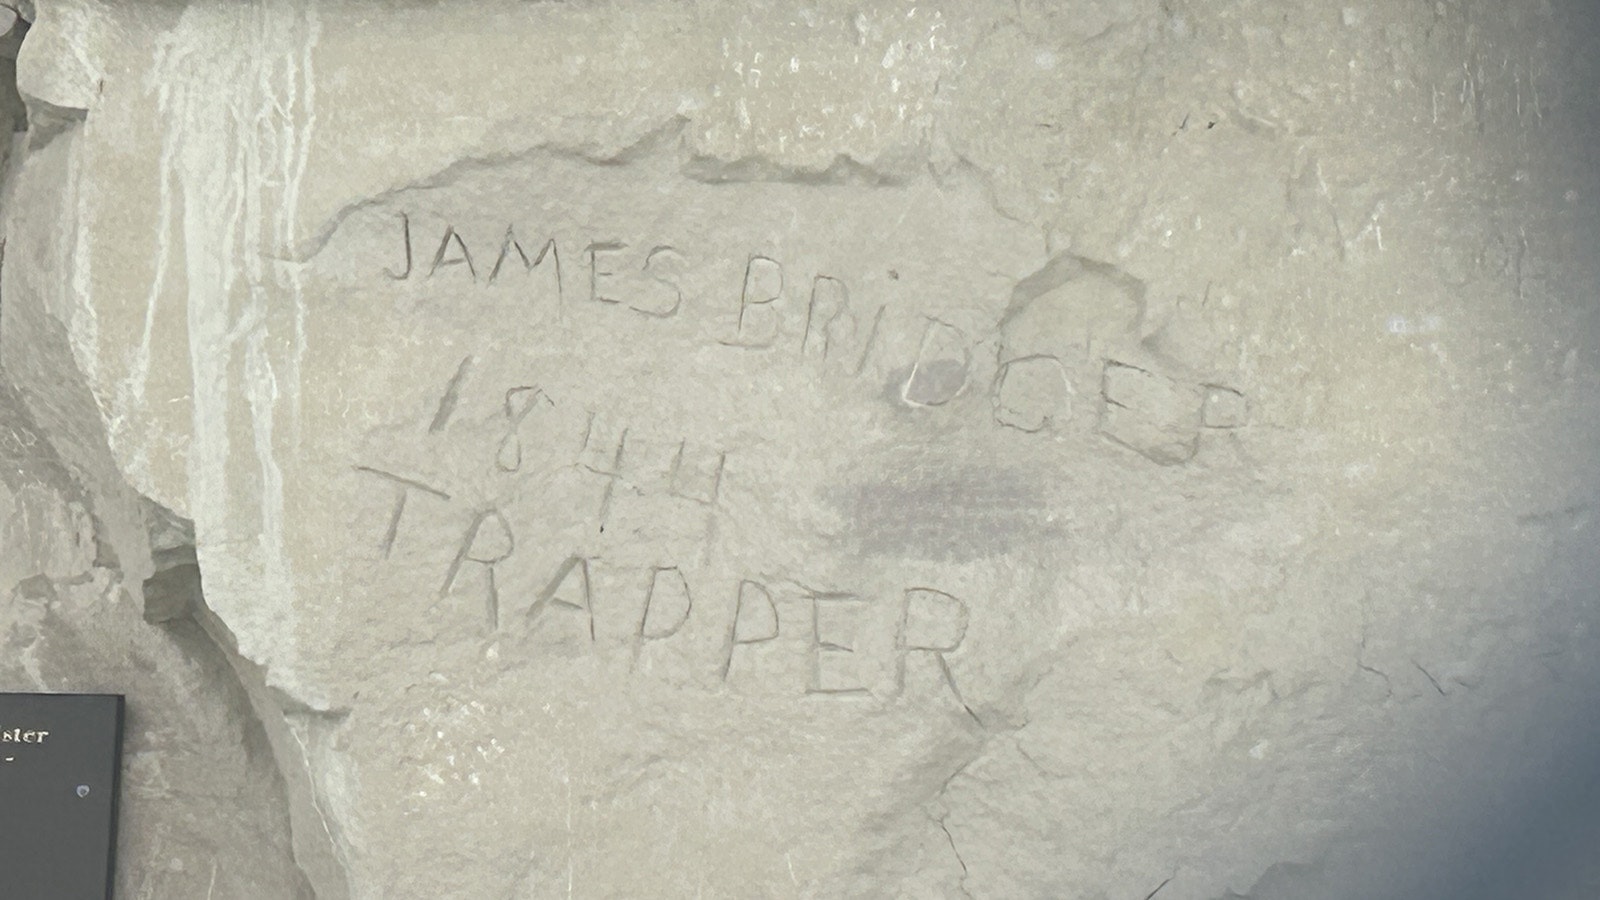 “James Bridger, Trapper, 1844” is one of the most prominent rock inscriptions at Names Hill in Lincoln County. Other names found there date back to trappers in the 1820s.